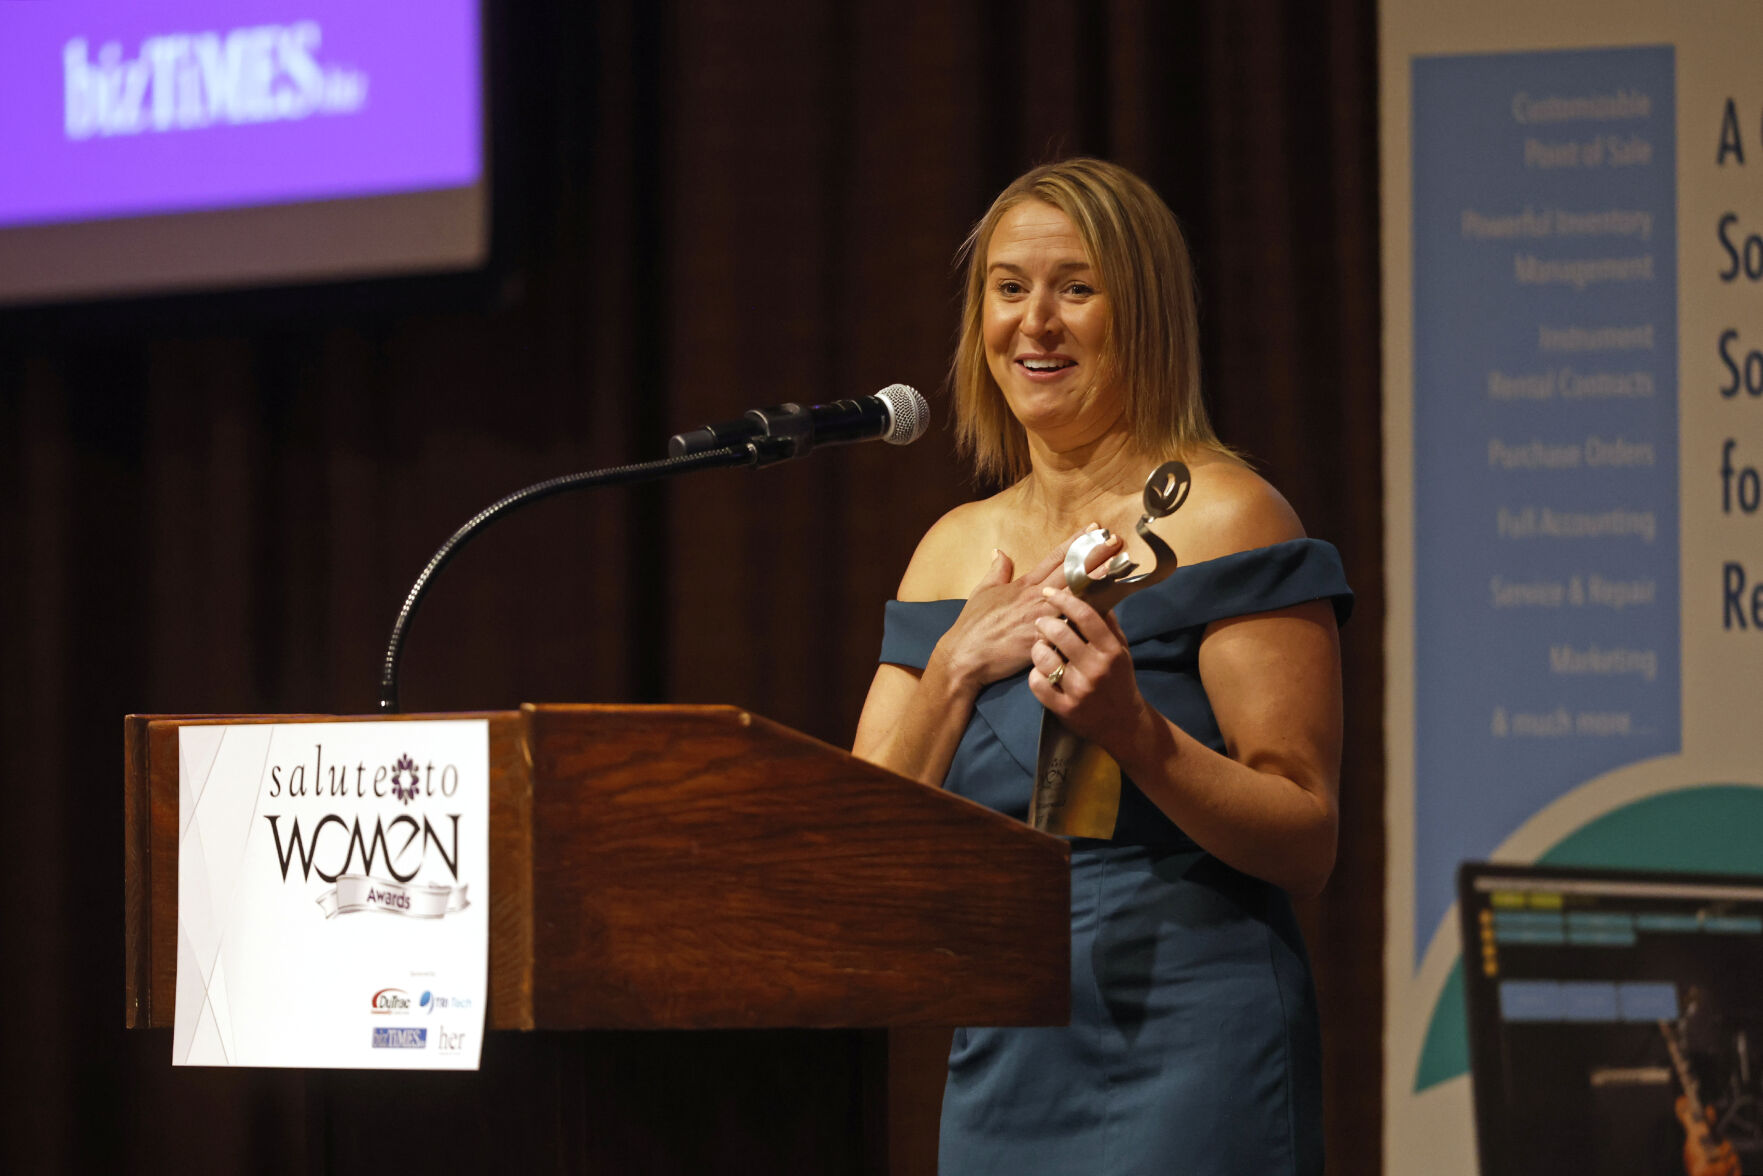 Callie Mescher-FitzGerald, who received the award for Woman to Watch, speaks at the event.    PHOTO CREDIT: Jessica Reilly